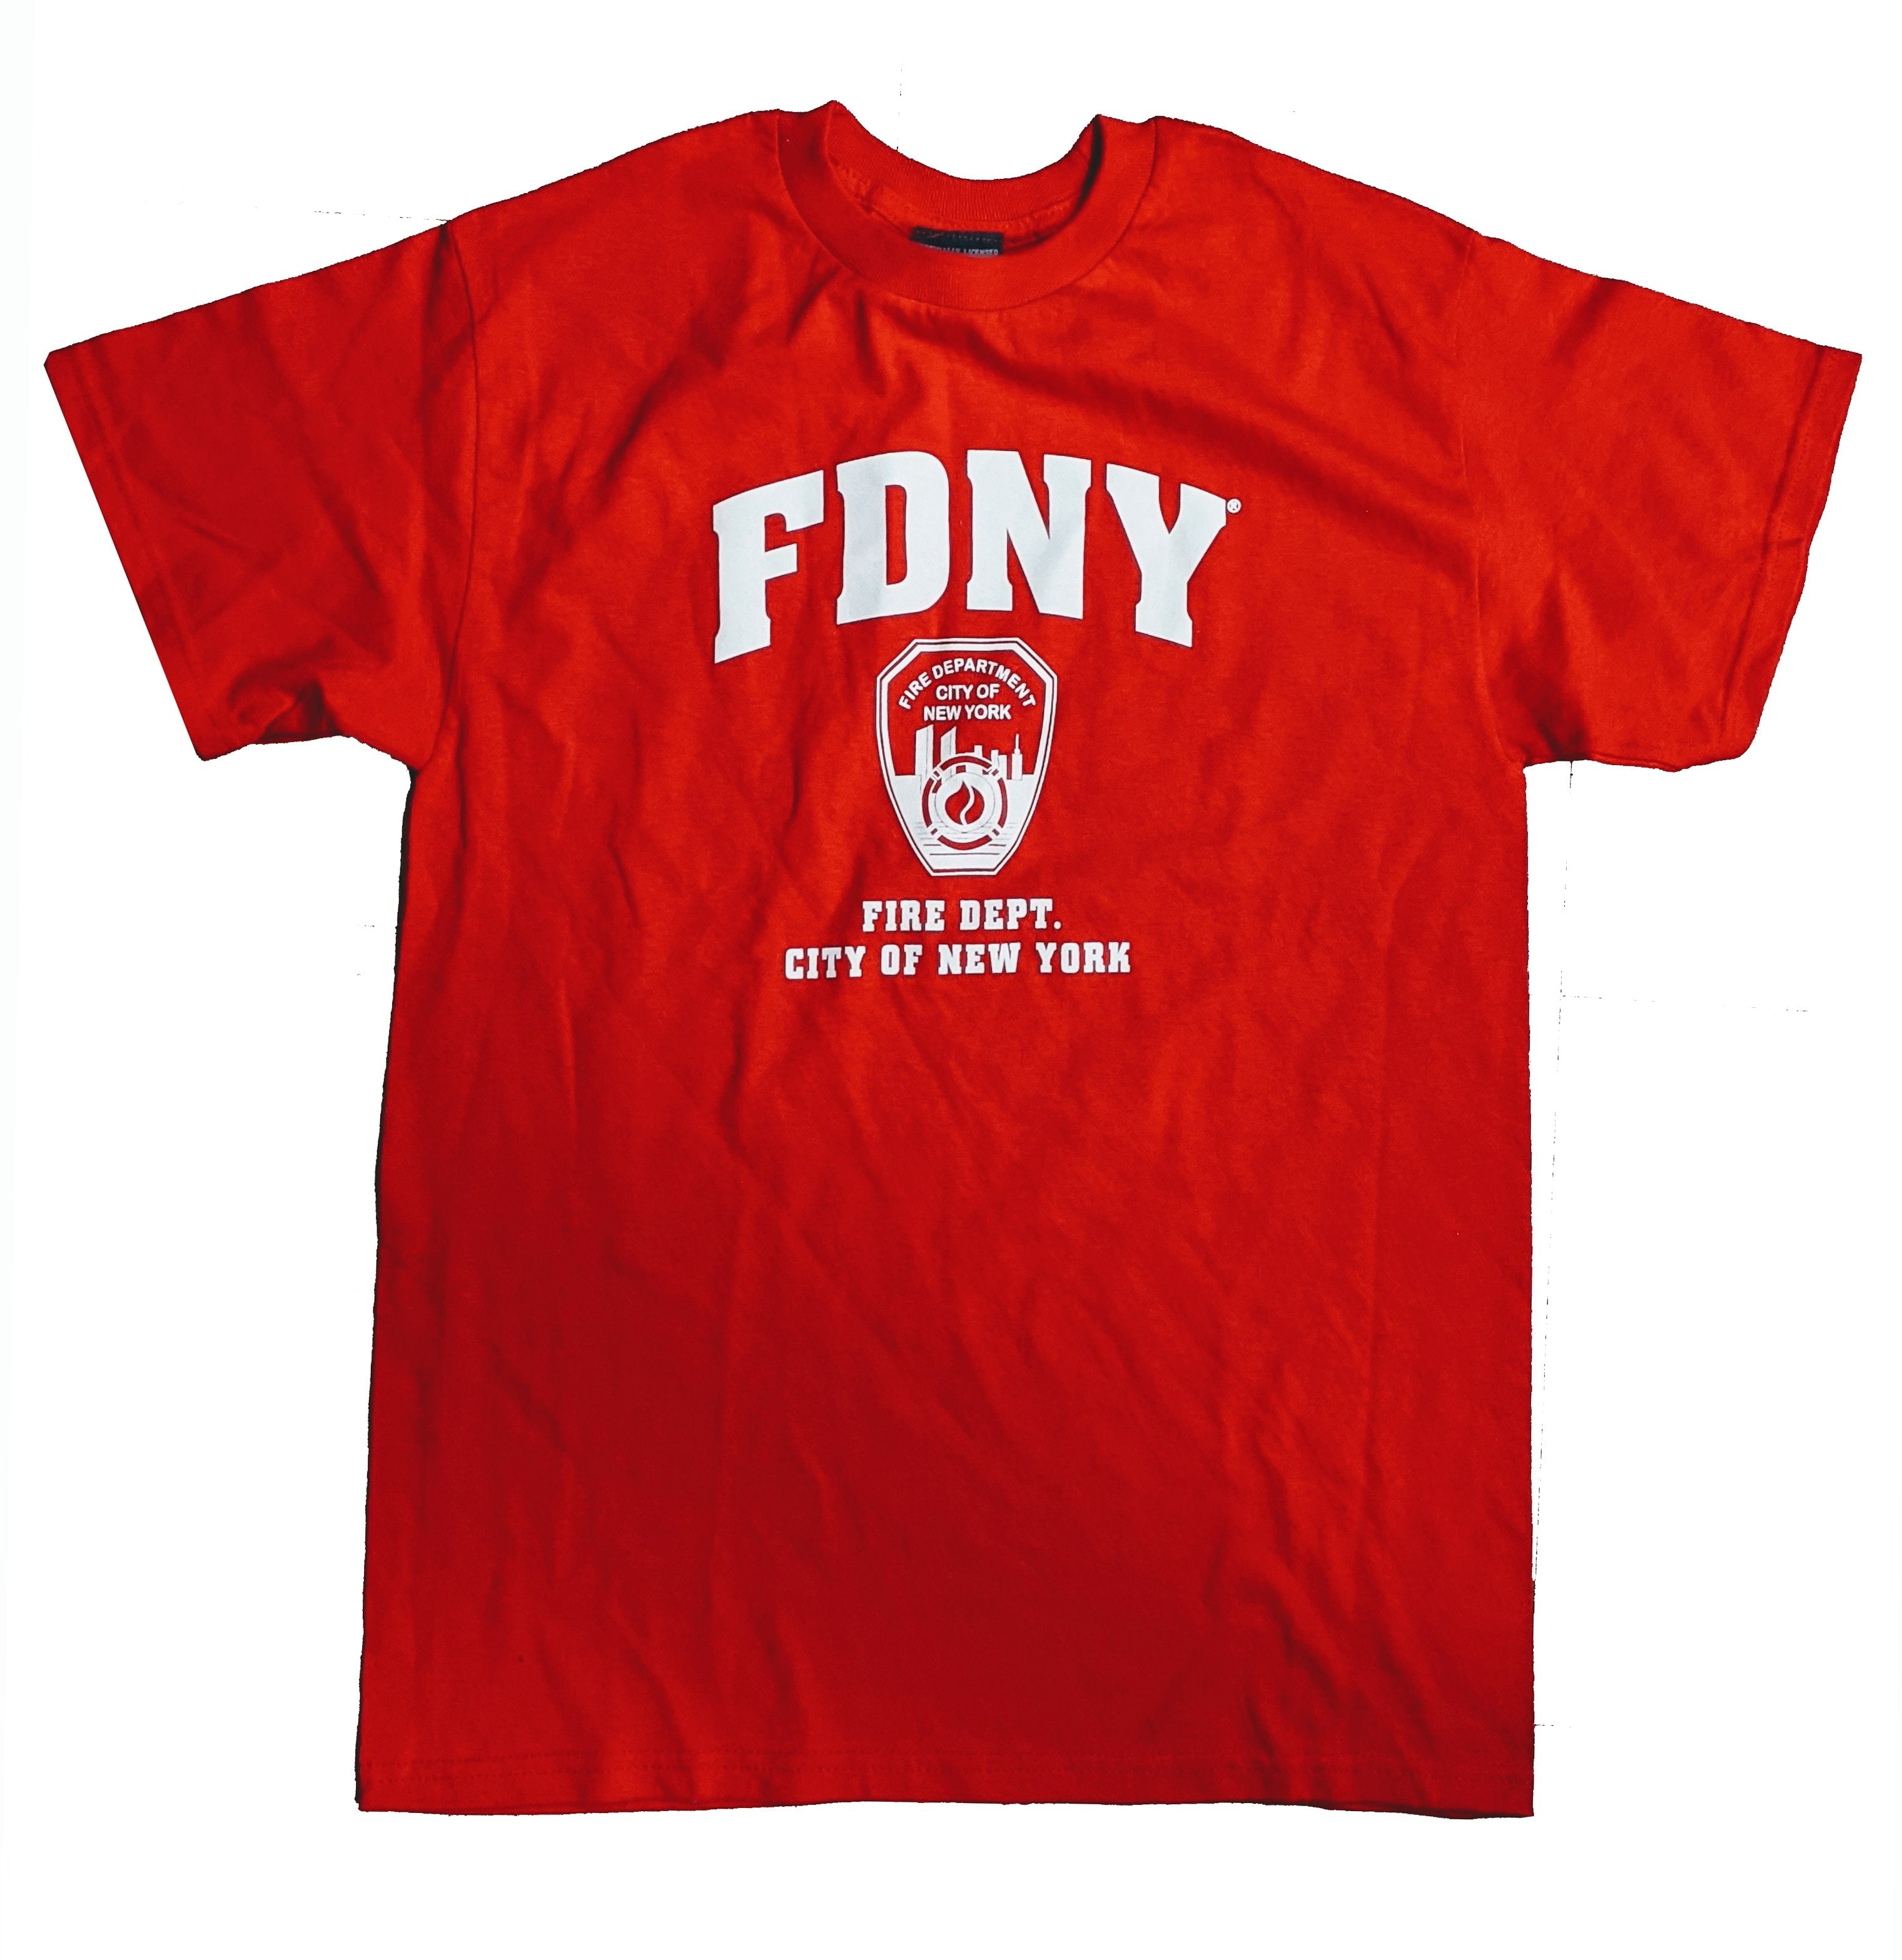 FDNY Officially Licensed T-Shirt Red Men's Tee Shirt